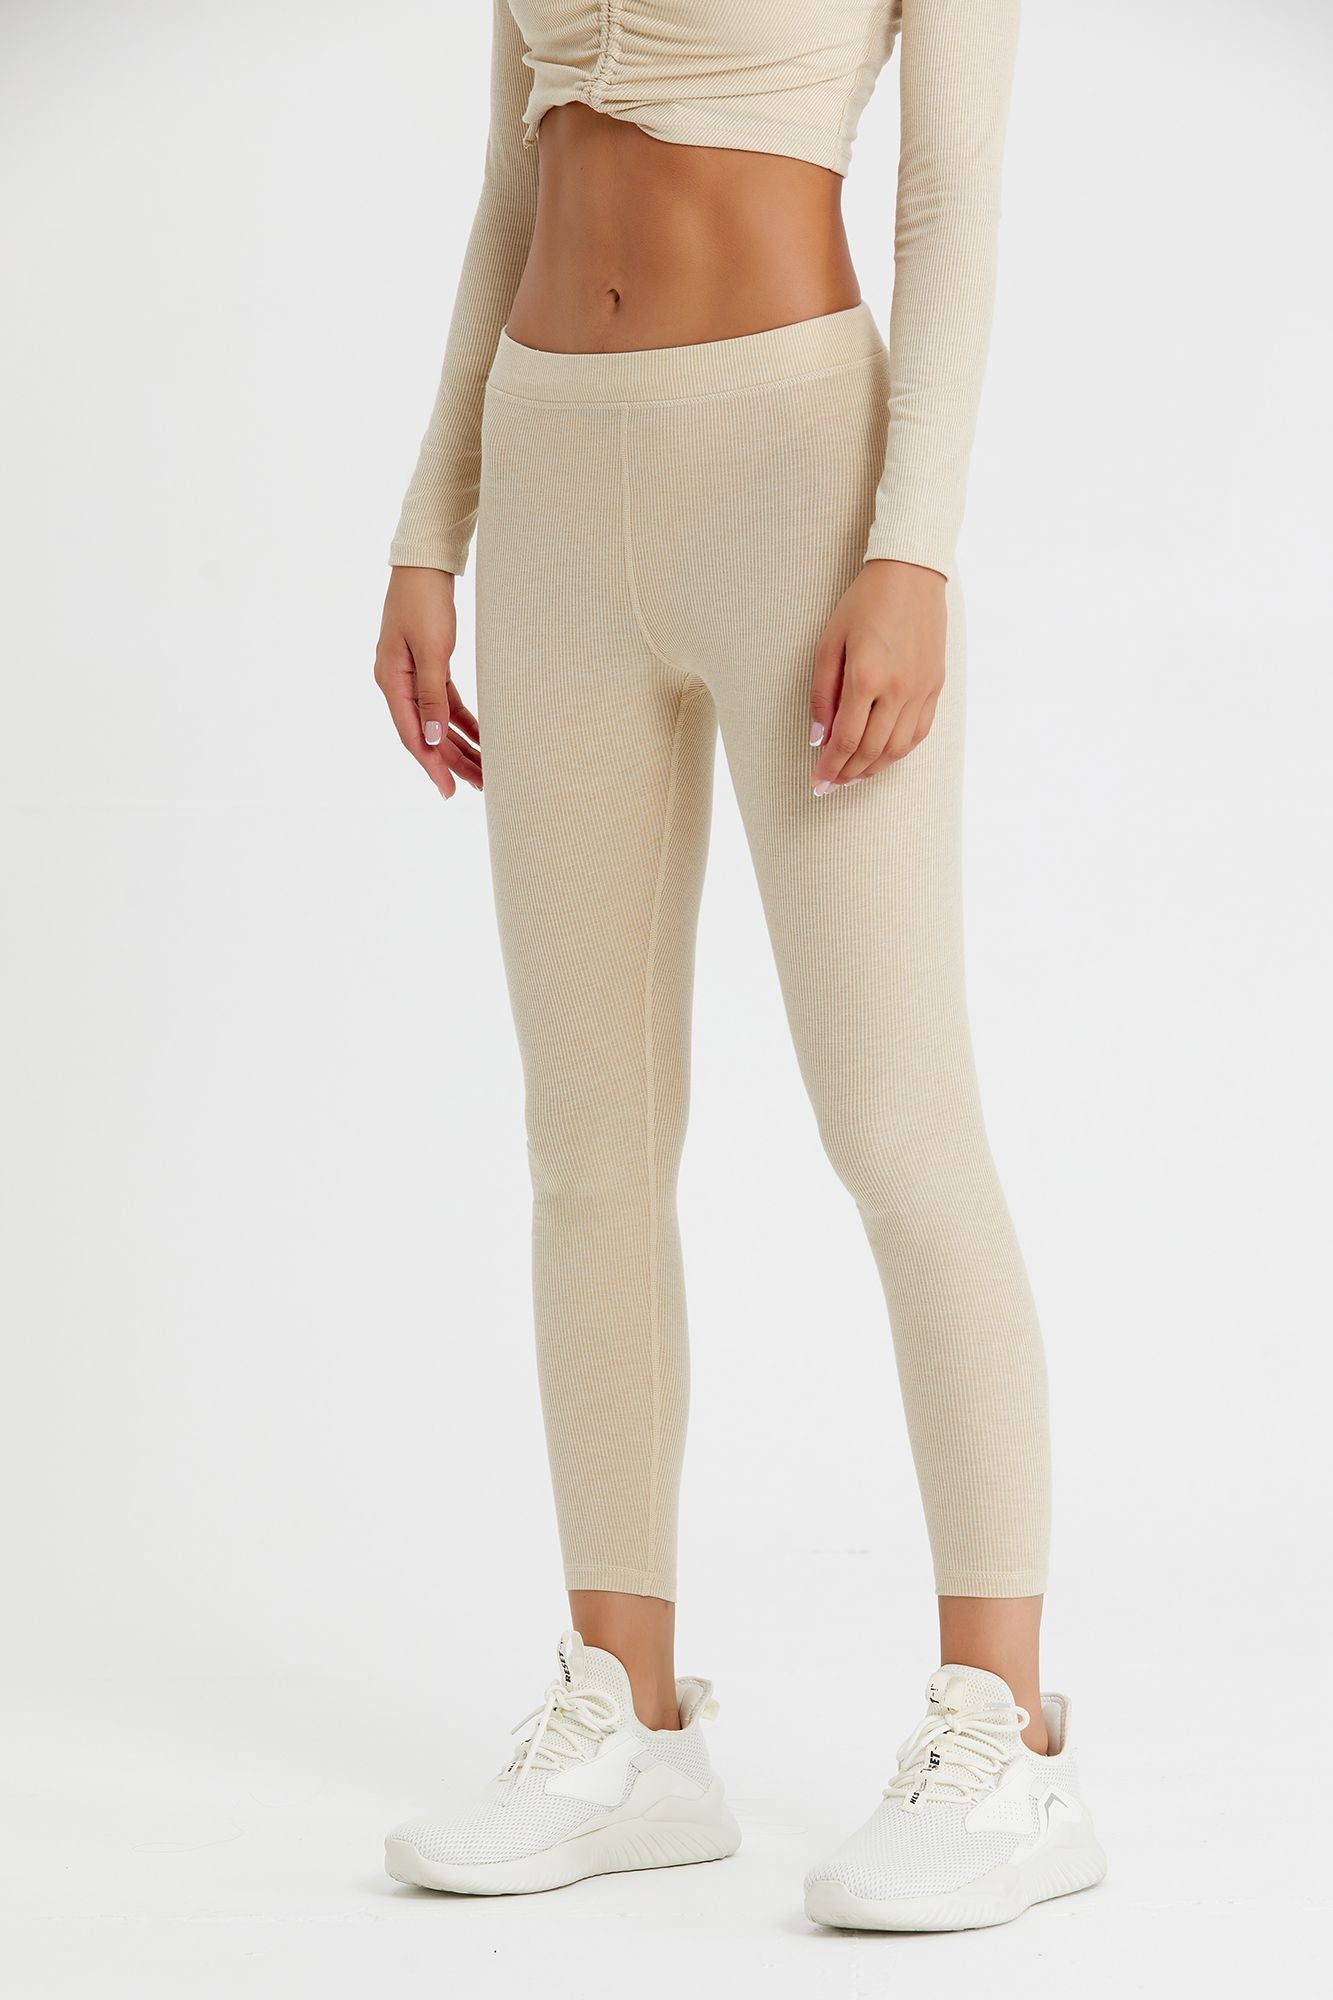 Ribbed Mid-Waist Workout Leggings